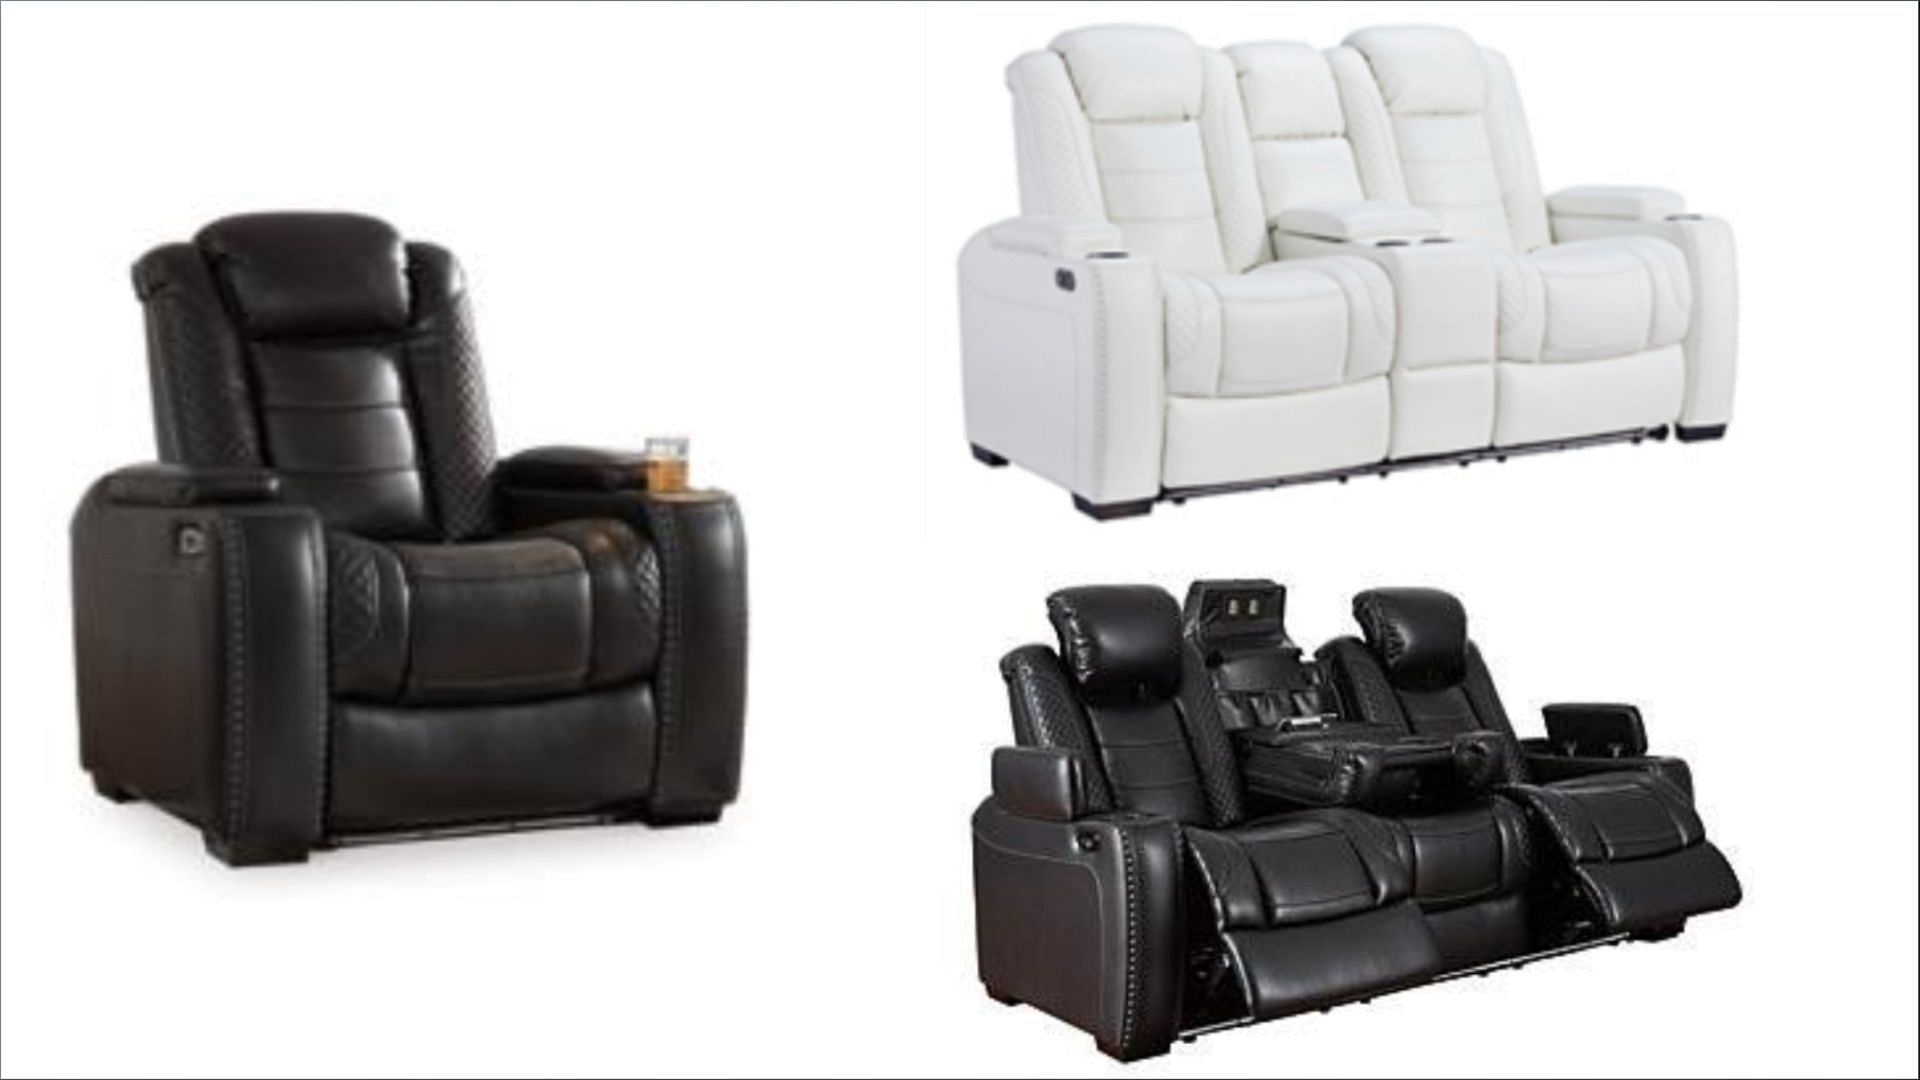 The recalled Ashley Furniture recliners, loveseats, and sofas pose fire risks (Image via Consumer Product Safety Commission)